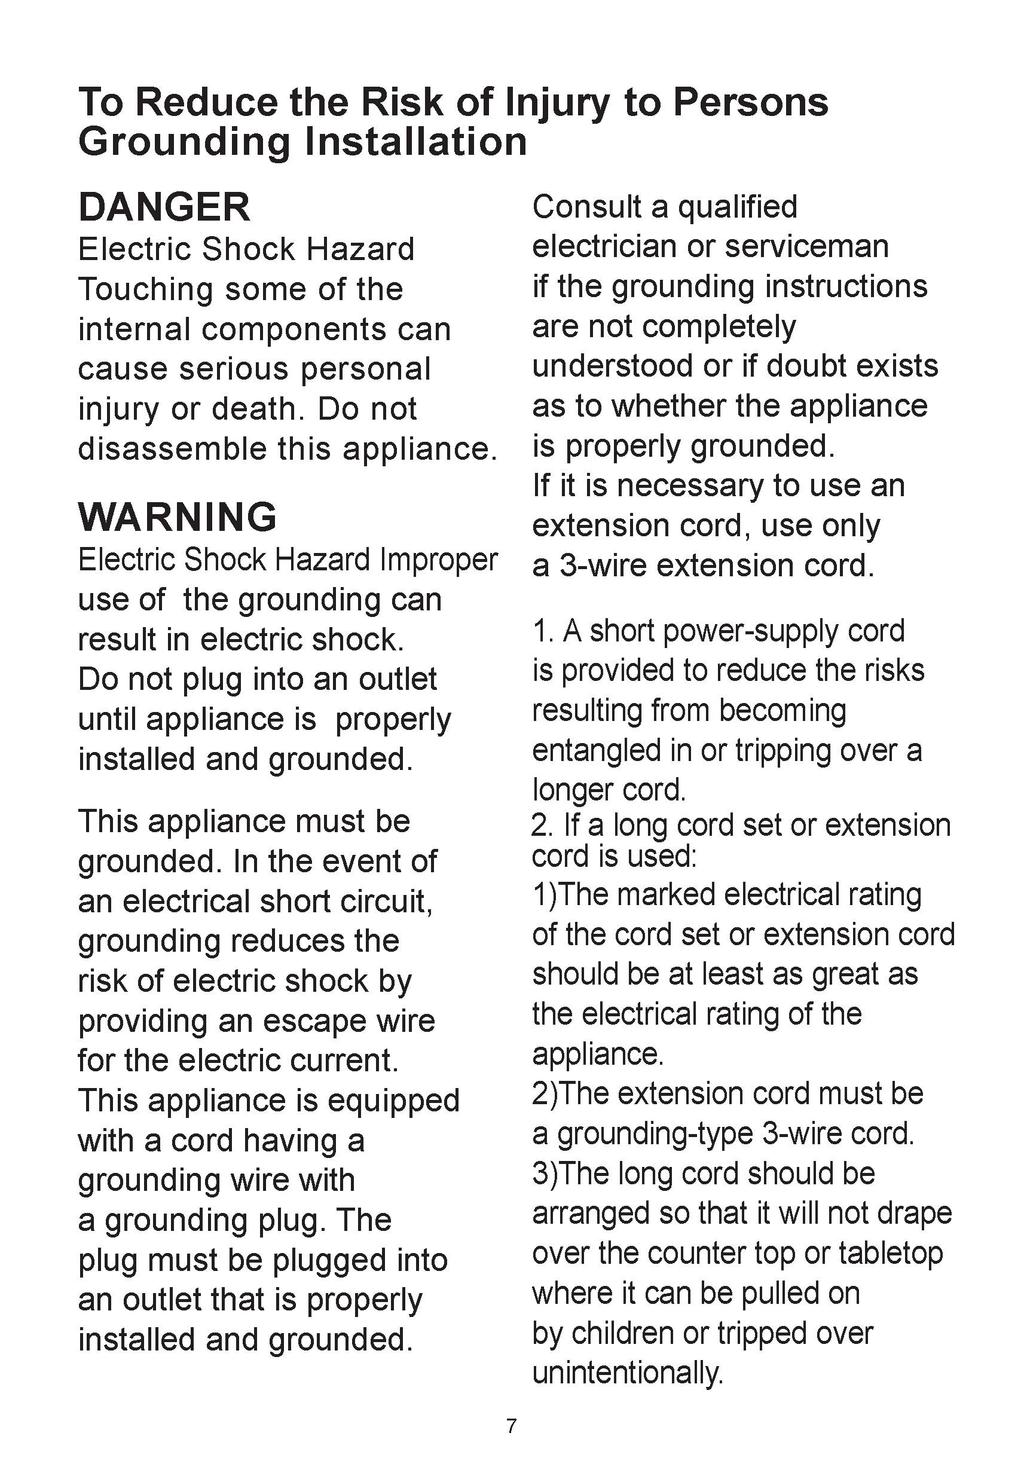 To Reduce the Risk of Injury to Persons G rounding Installation DANGER Electric Shock Hazard Touching some of the internal components can cause serious personal injury or death.